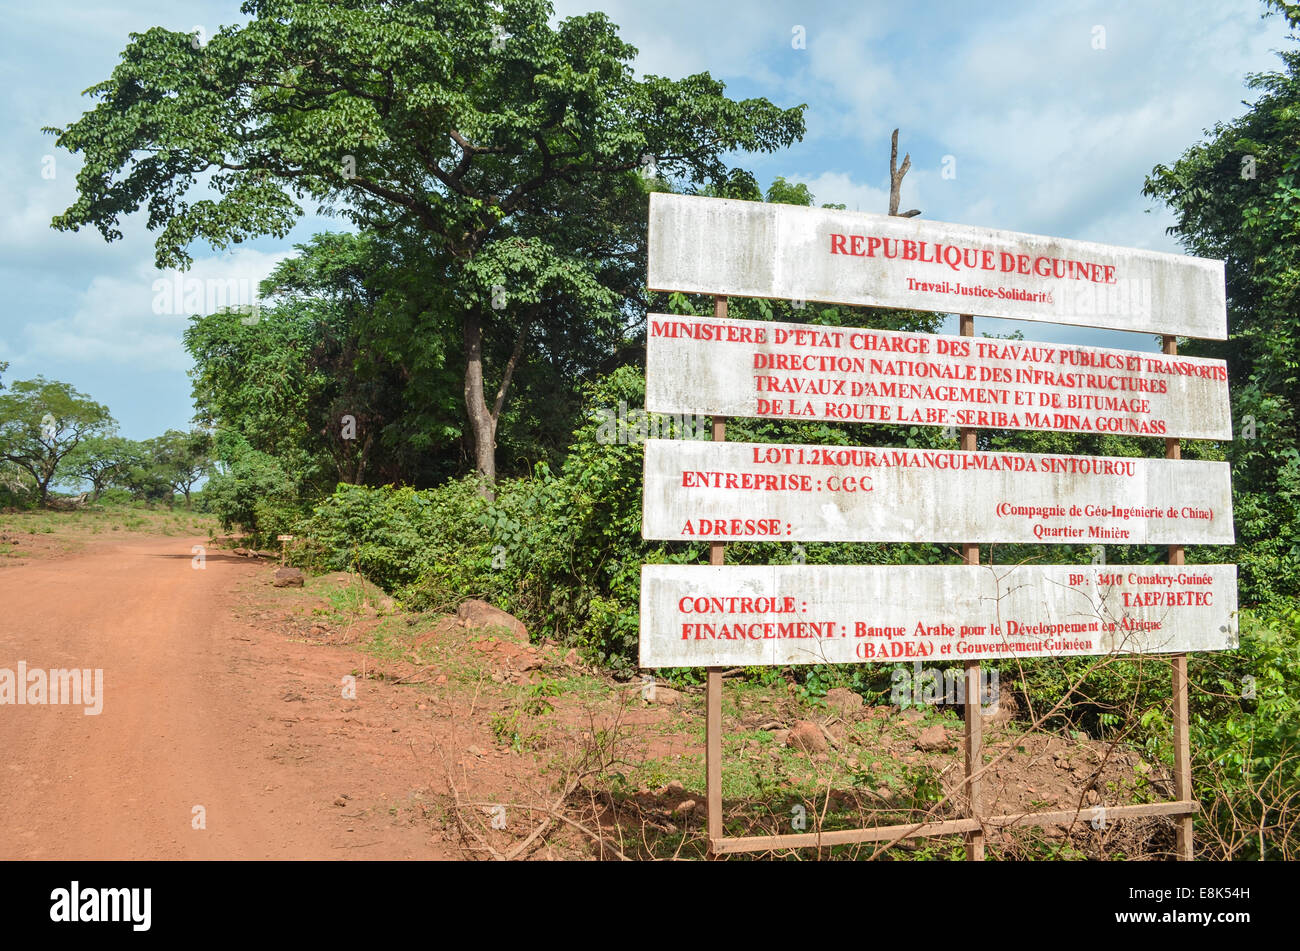 Road sign about the construction of a new road in the Republic of Guinea Stock Photo